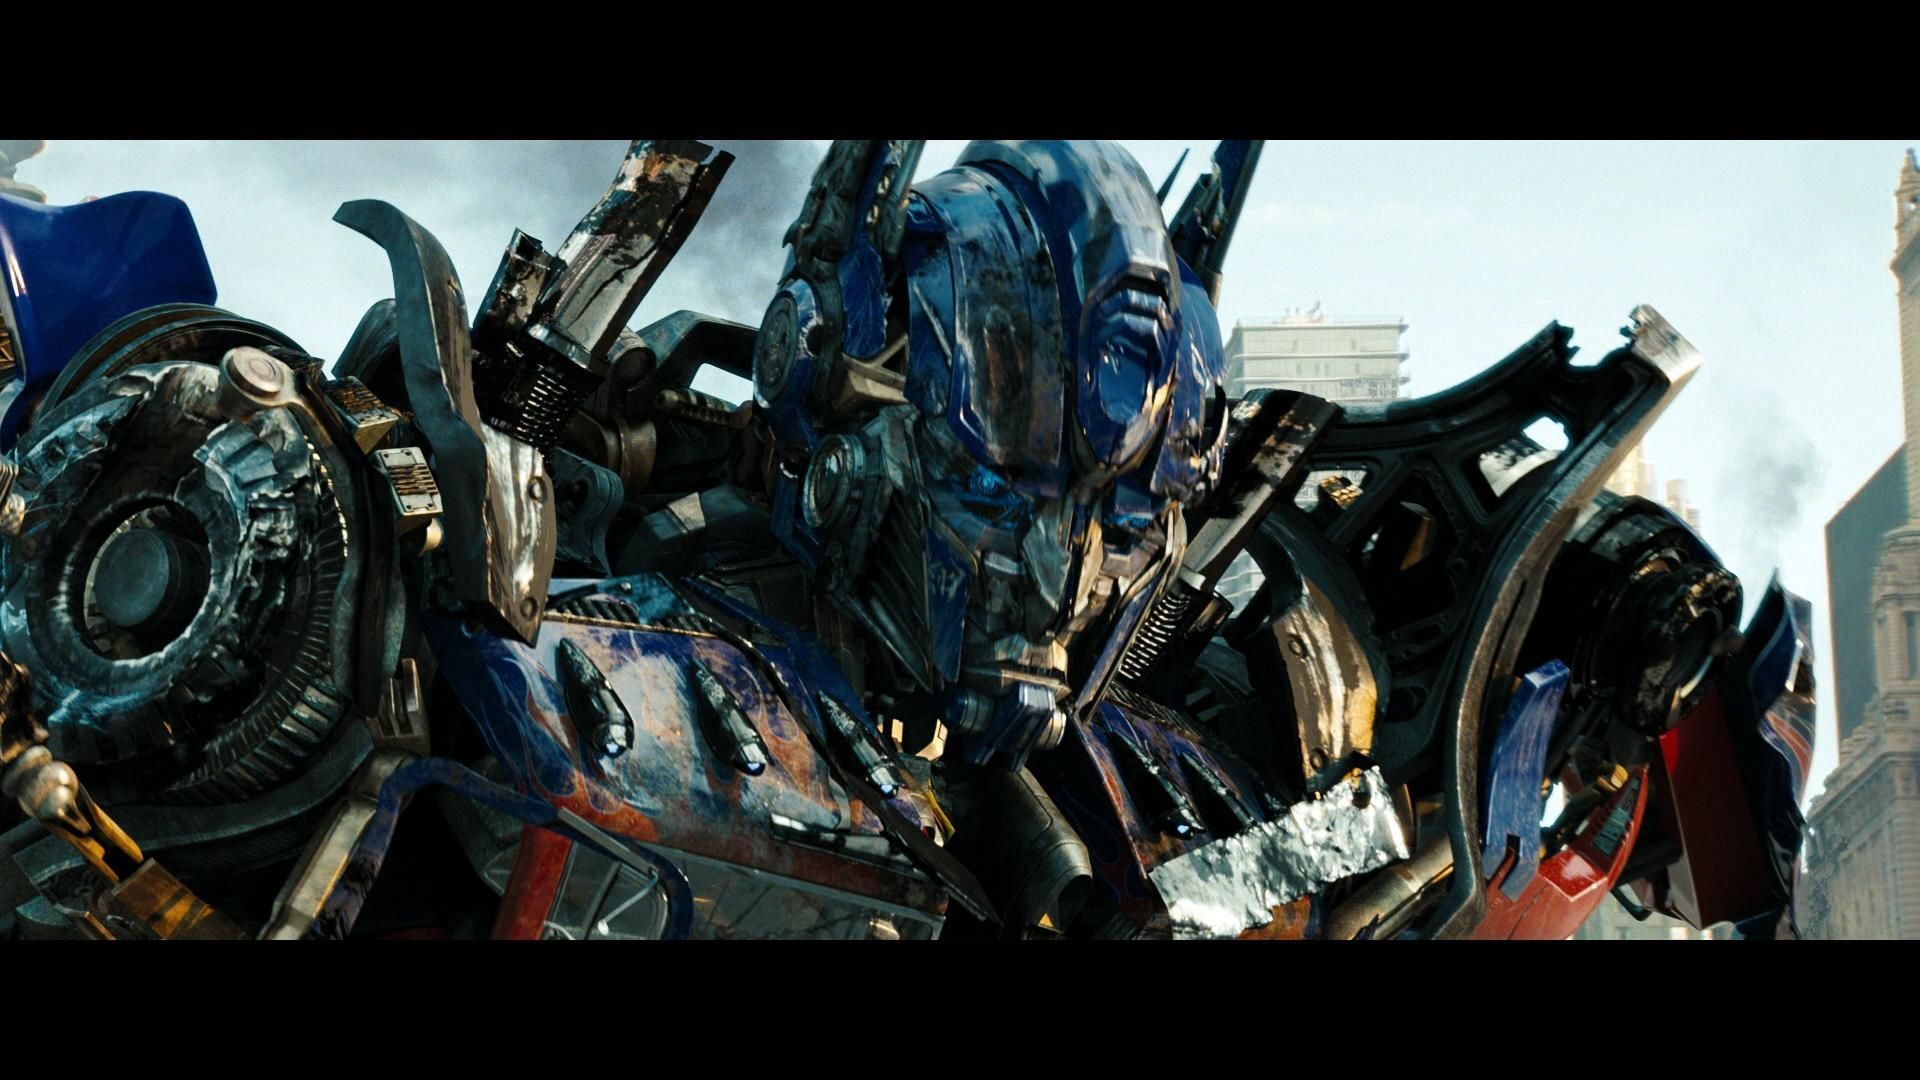 Transformers Dark Of The Moon Image: Transformers Dark Of The Moon. Optimus prime wallpaper, Optimus prime, Transformers